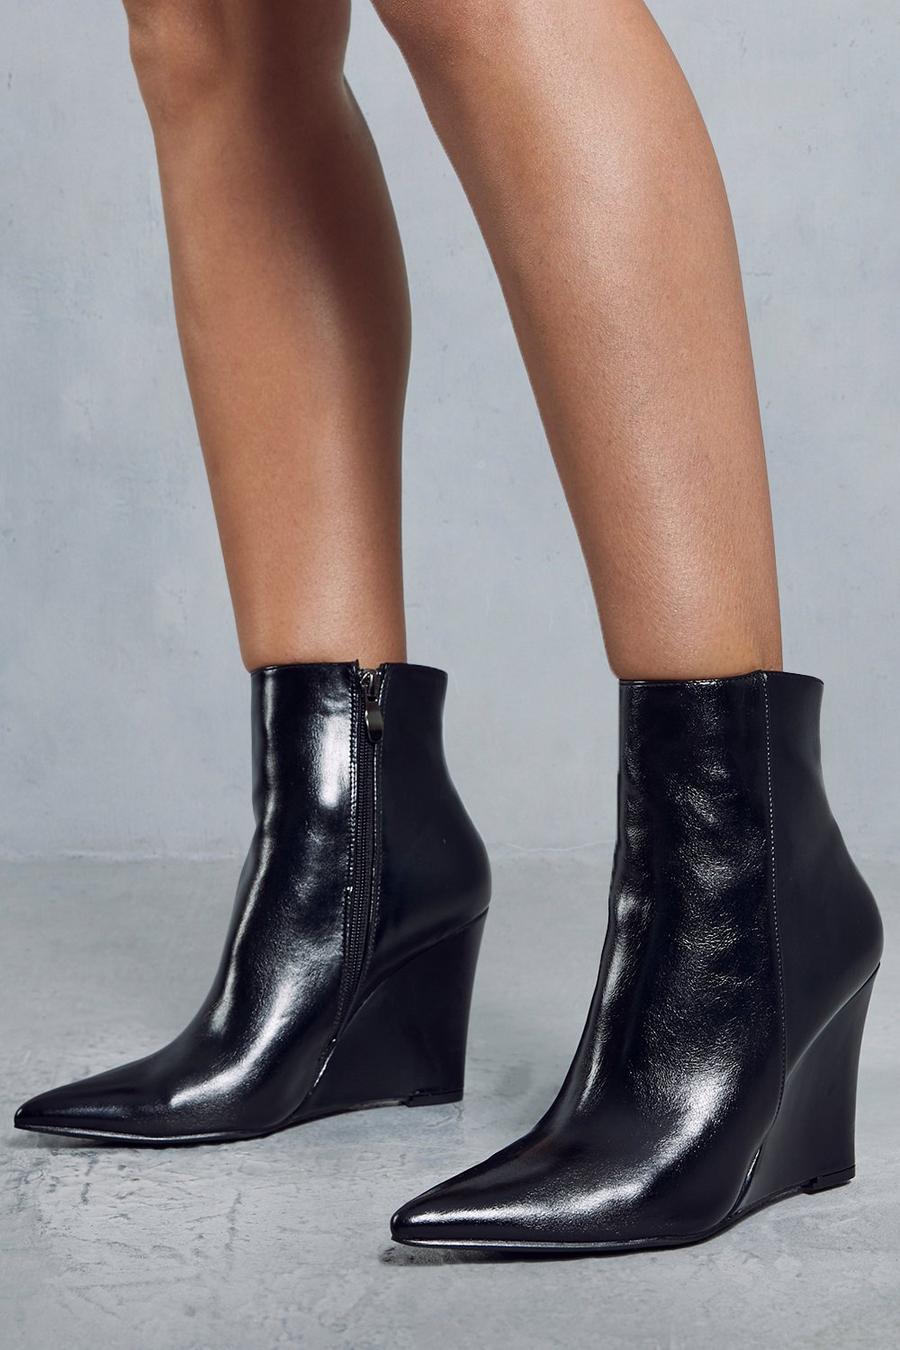 Black Leather Look Wedge Heel Ankle Boots